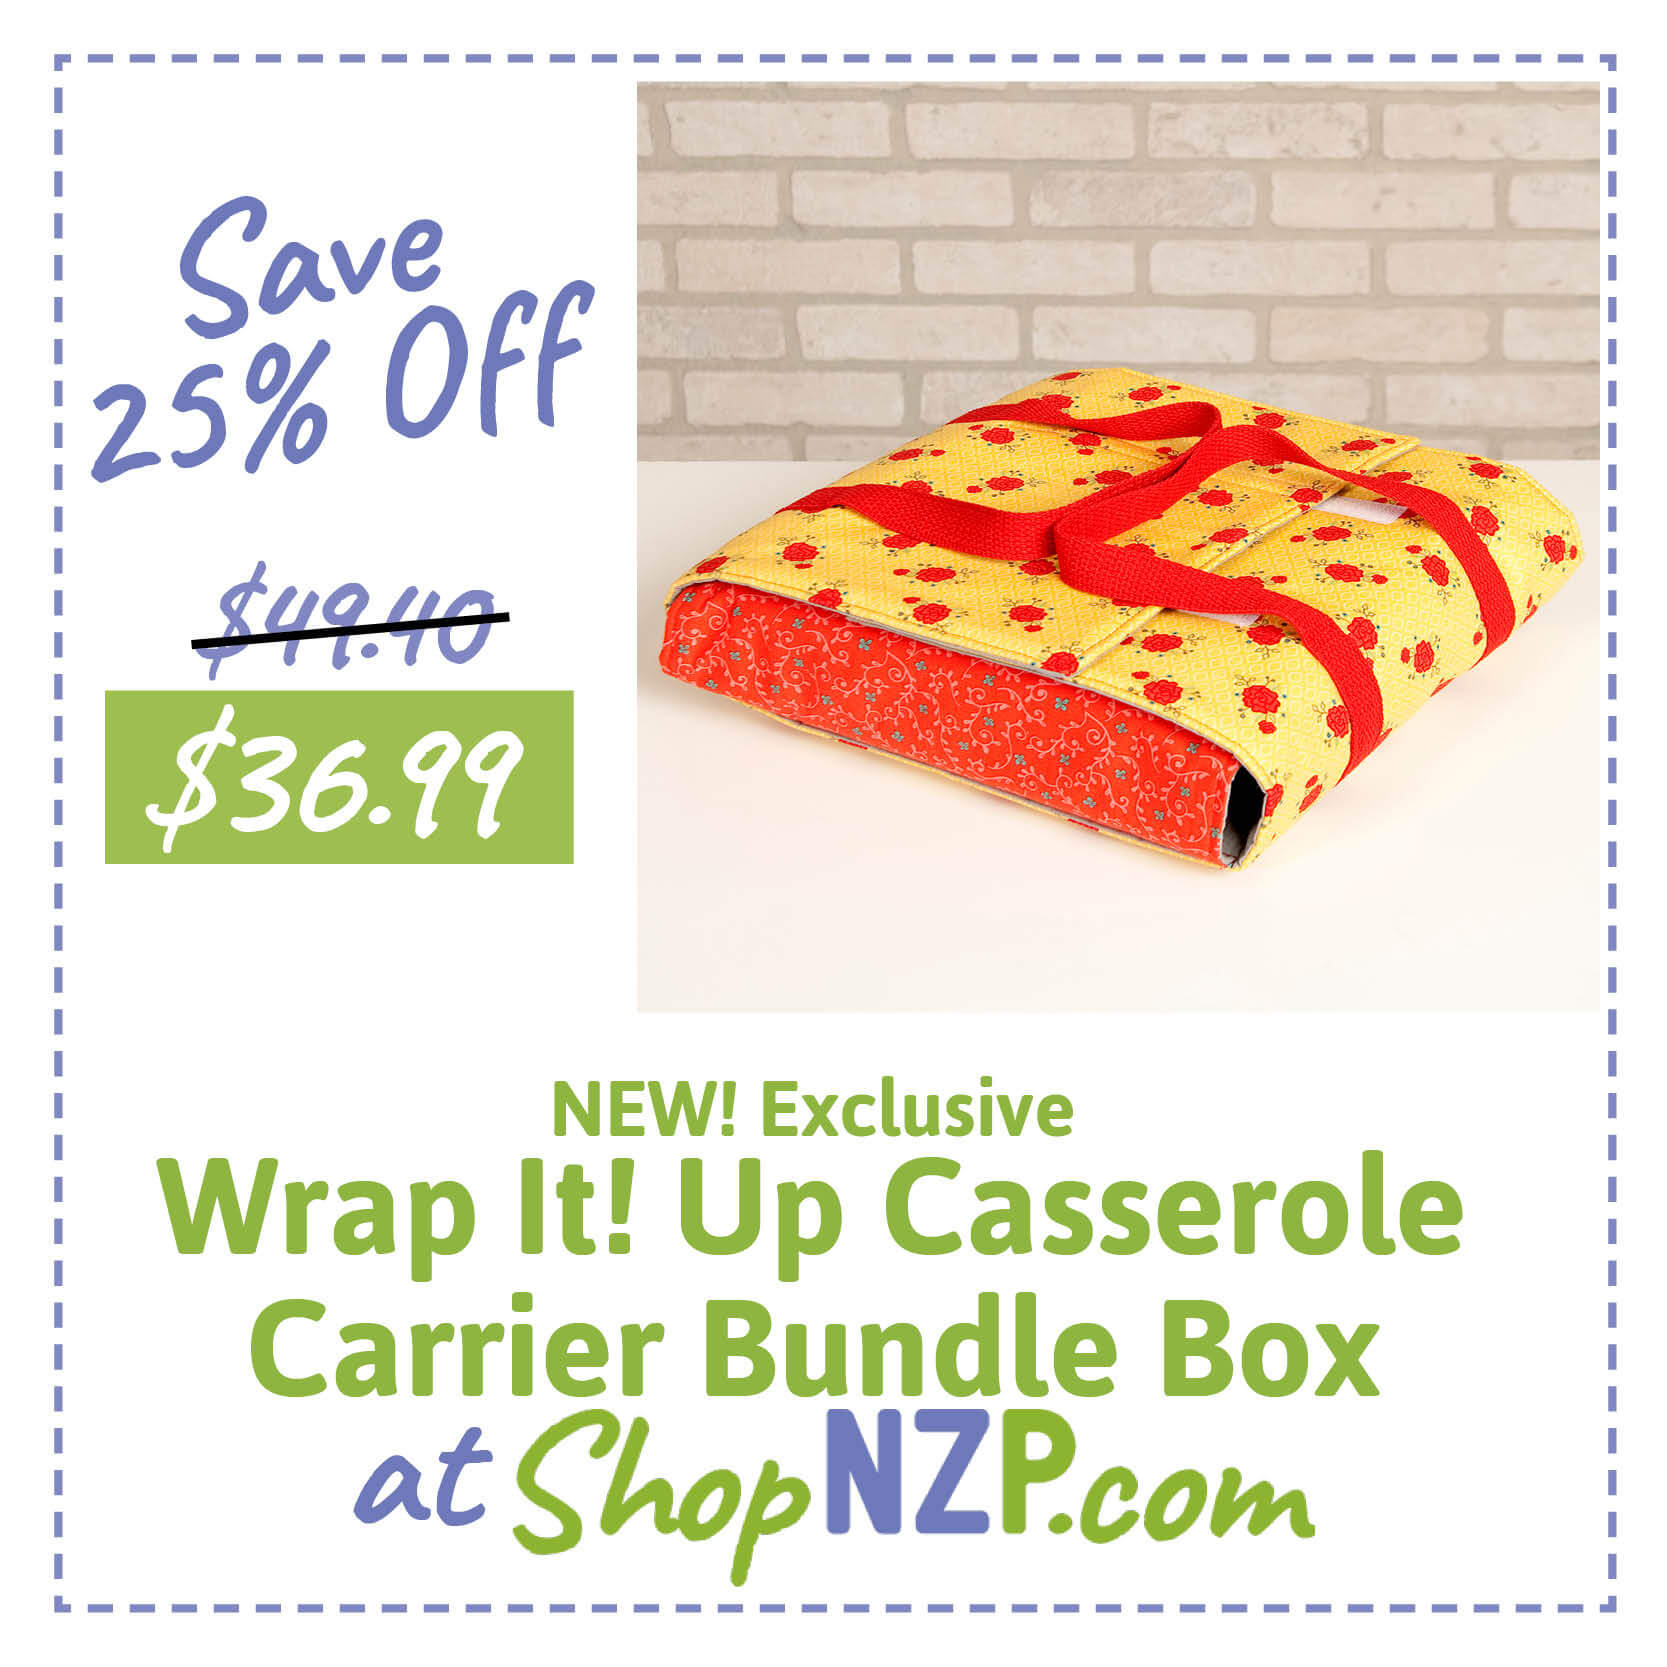 Wrap It Up! Casserole Carrier Sewing Project Bundle Box Kits available at Nancy Zieman Productions at ShopNZP.com